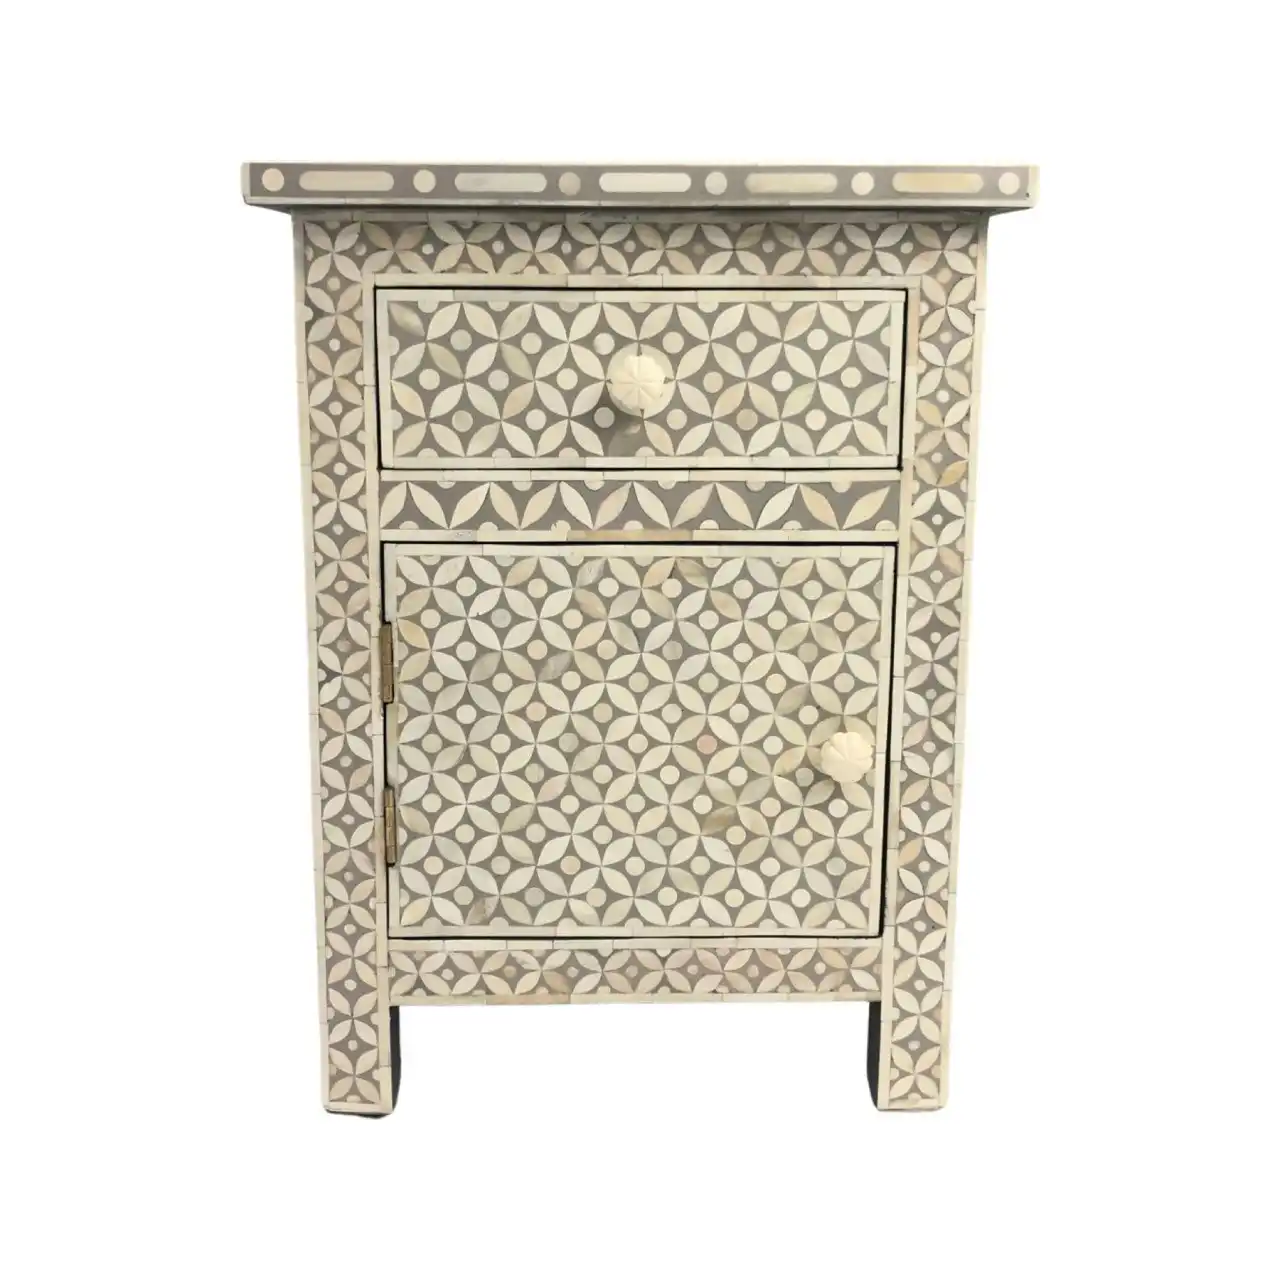 Zohi Interiors Bone Inlay Bedside Cabinet in Celtic/Grey